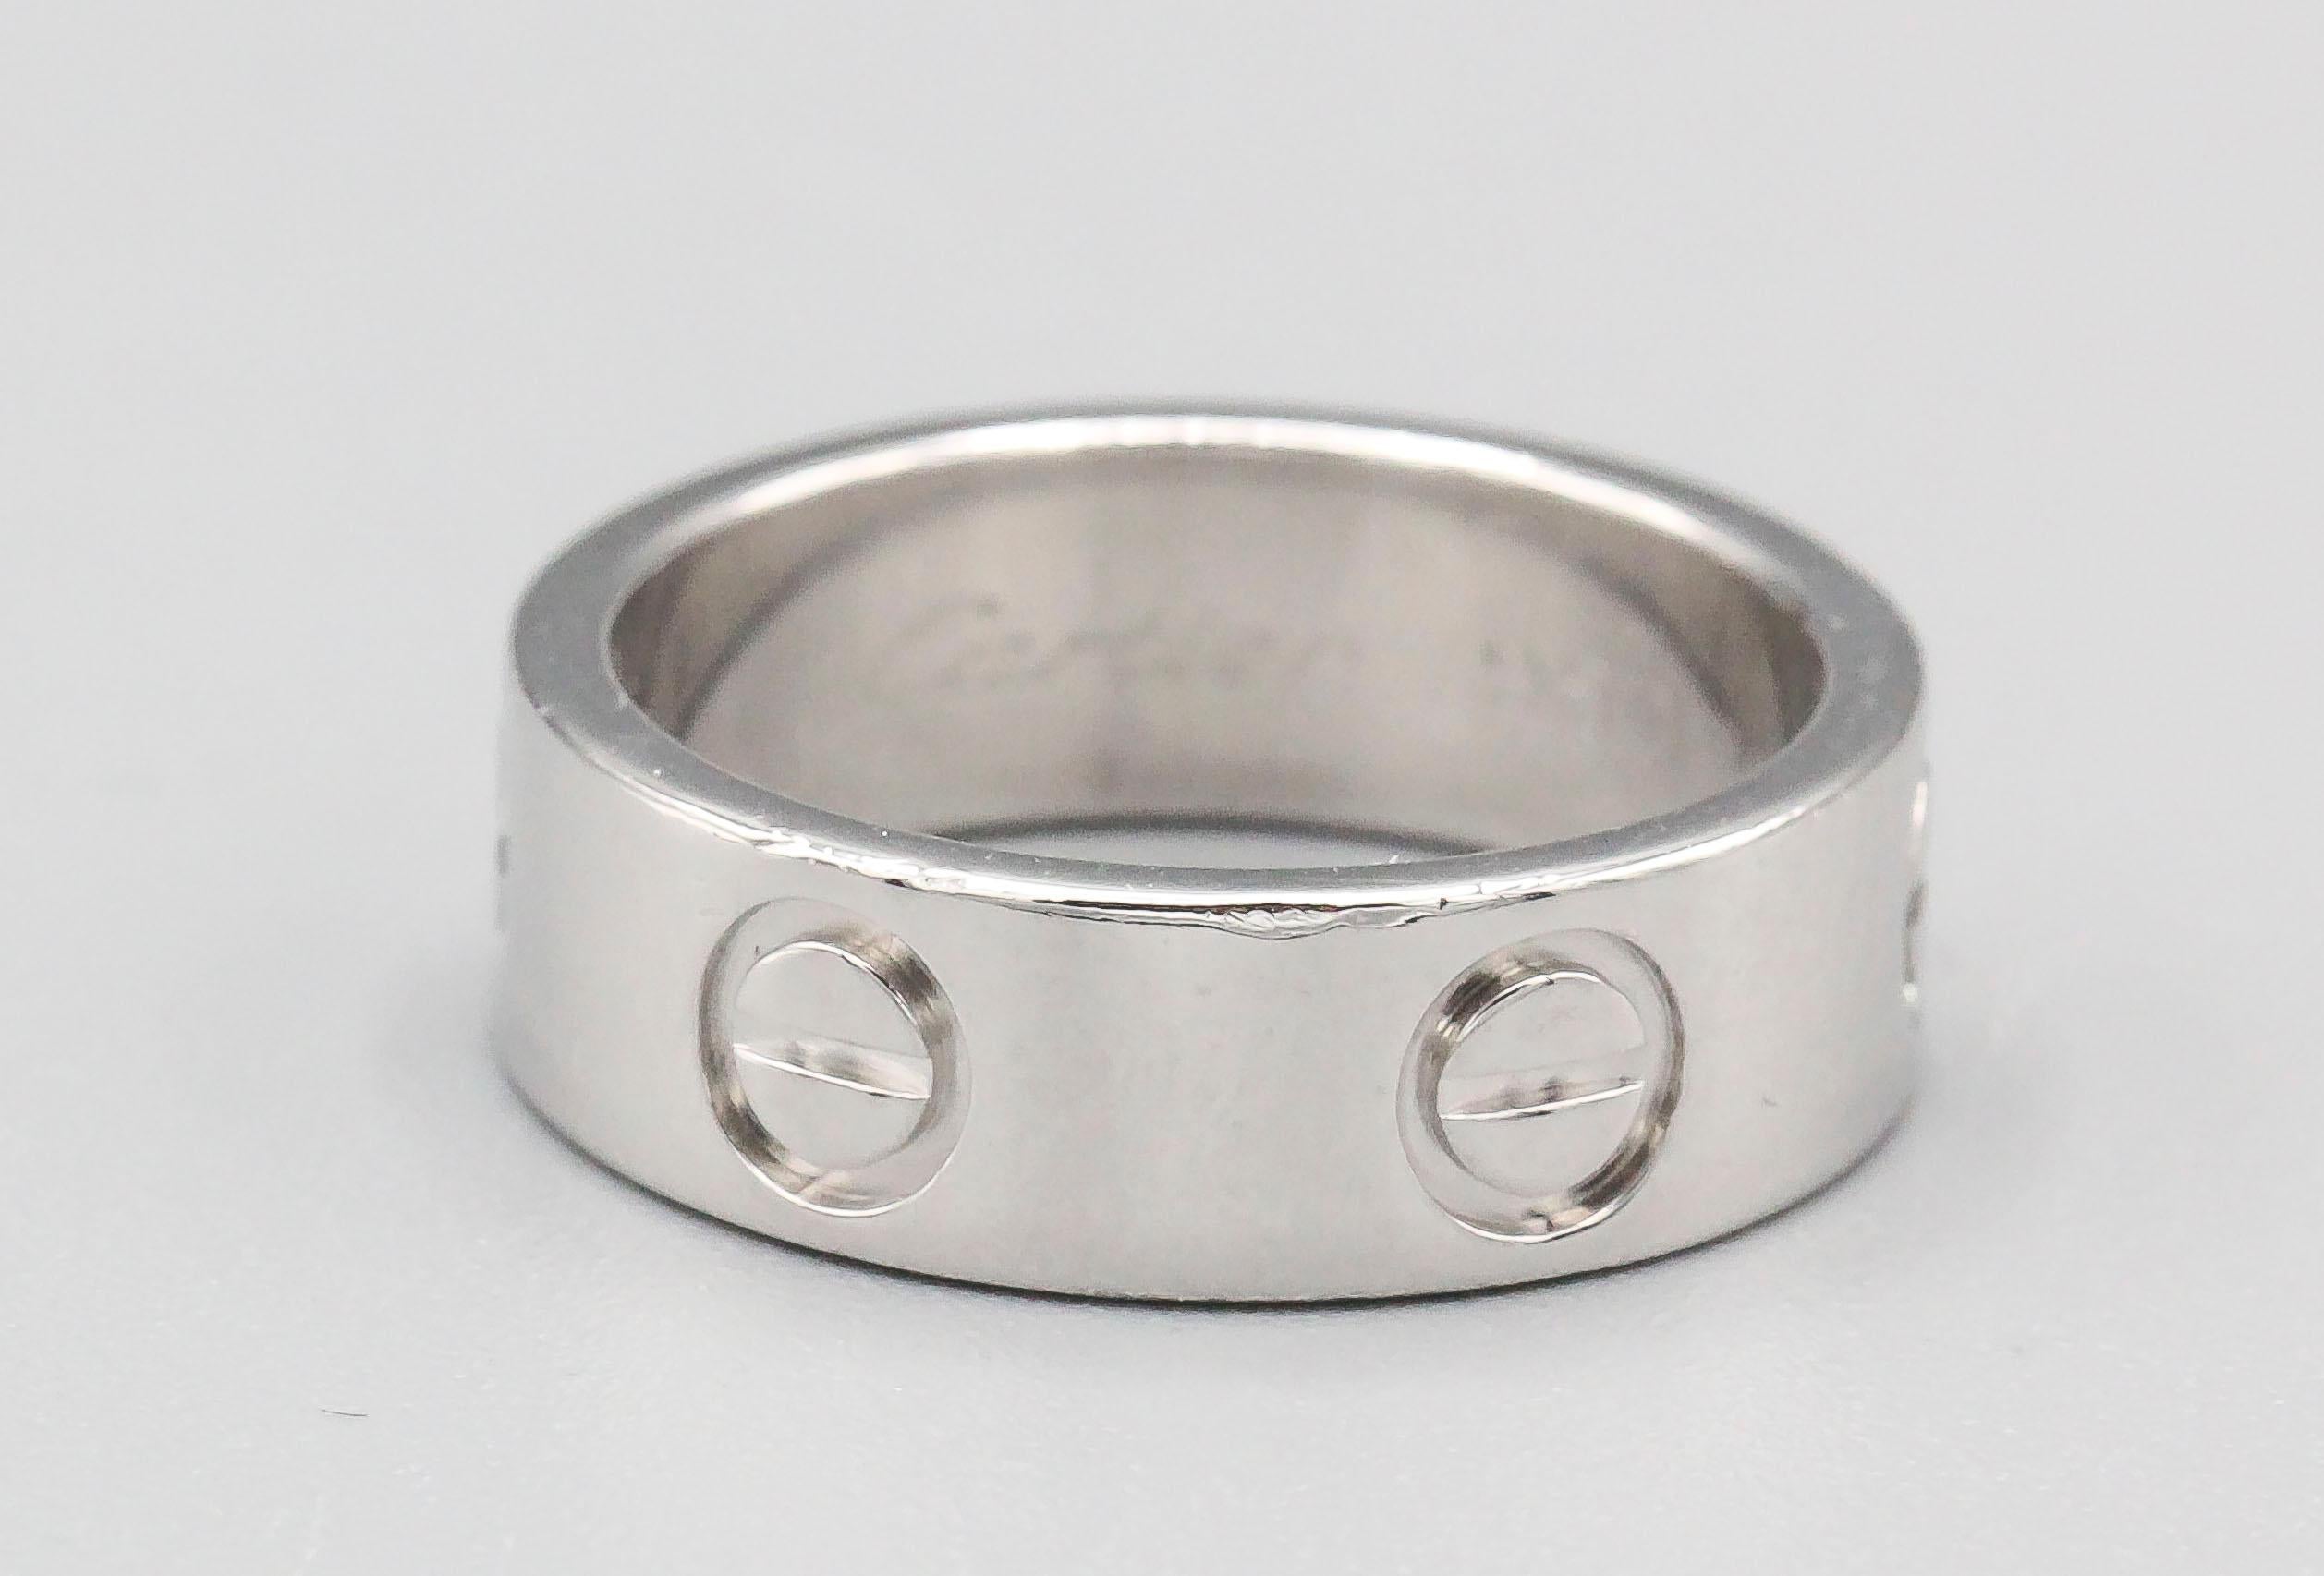 Timeless platinum band from the LOVE collection by Cartier. European size 47. 

Hallmarks: Cartier, 47, reference numbers, 950, copyright, 2001, maker's mark.